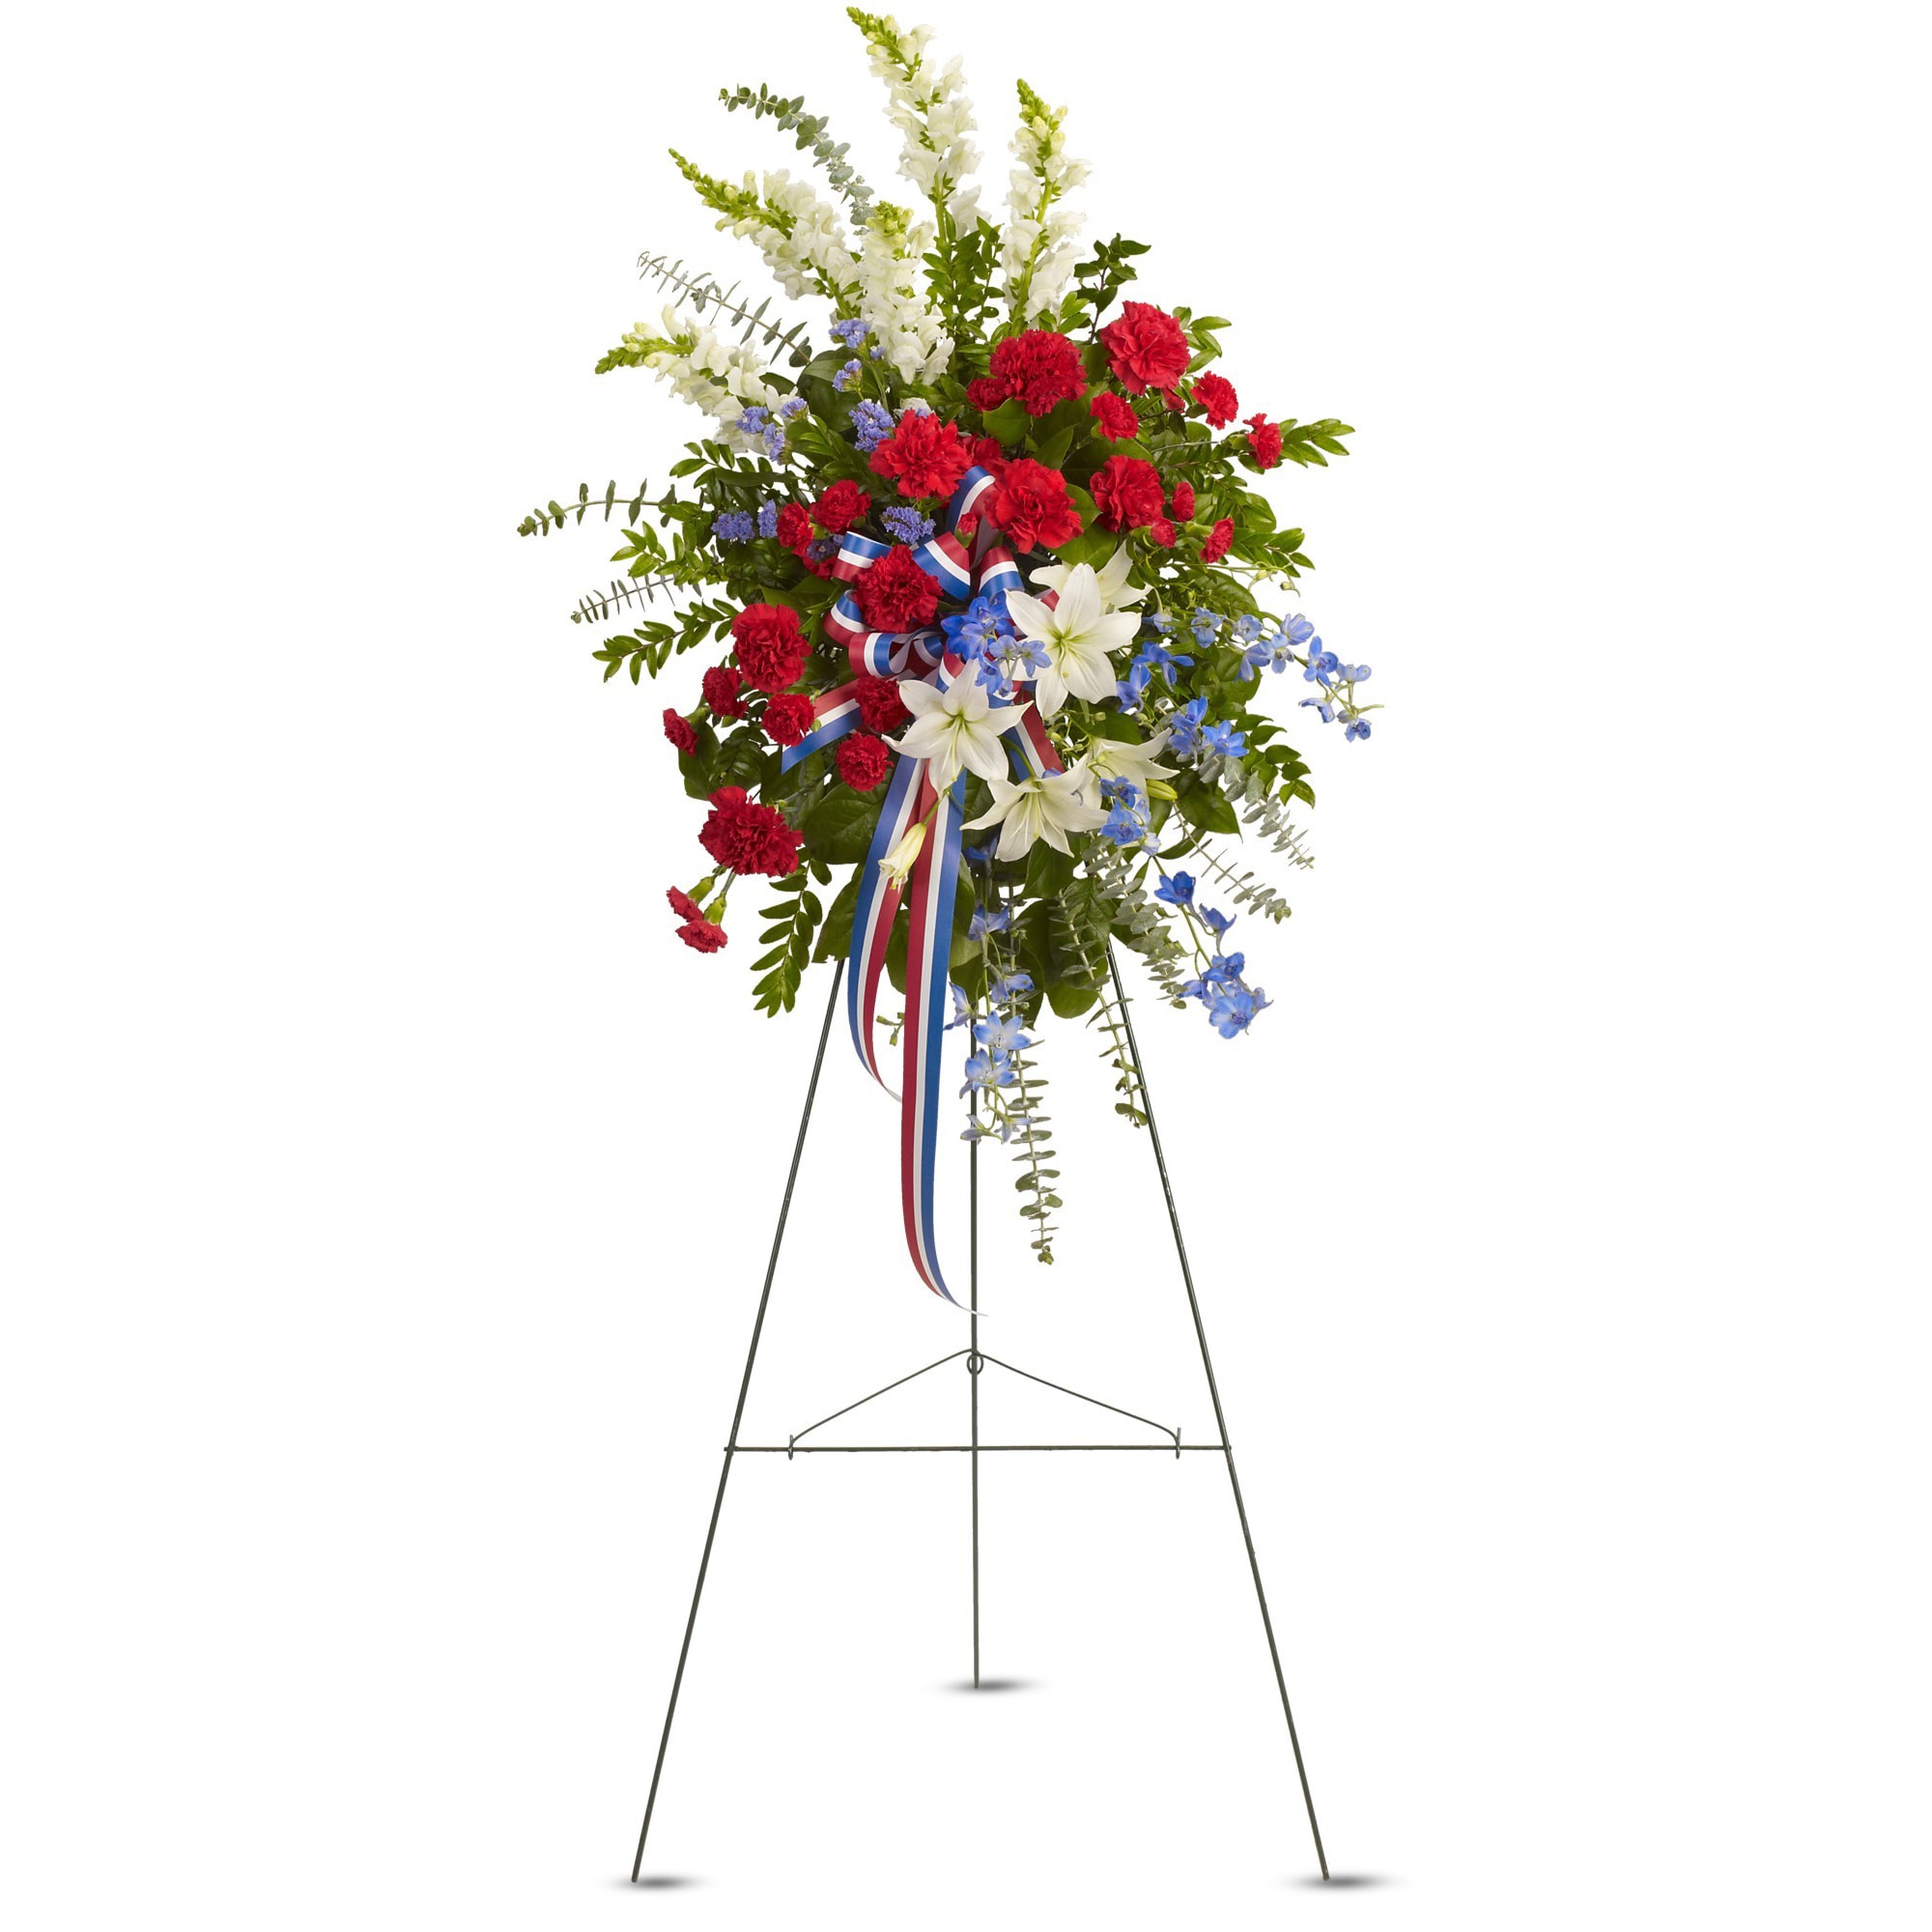 Sacred Duty Spray - Standing tall, proud and patriotic, this dazzling free-standing spray is like a fireworks display made of graceful flowers. Uniquely beautiful, it's a lovely way to honor a great loss. 